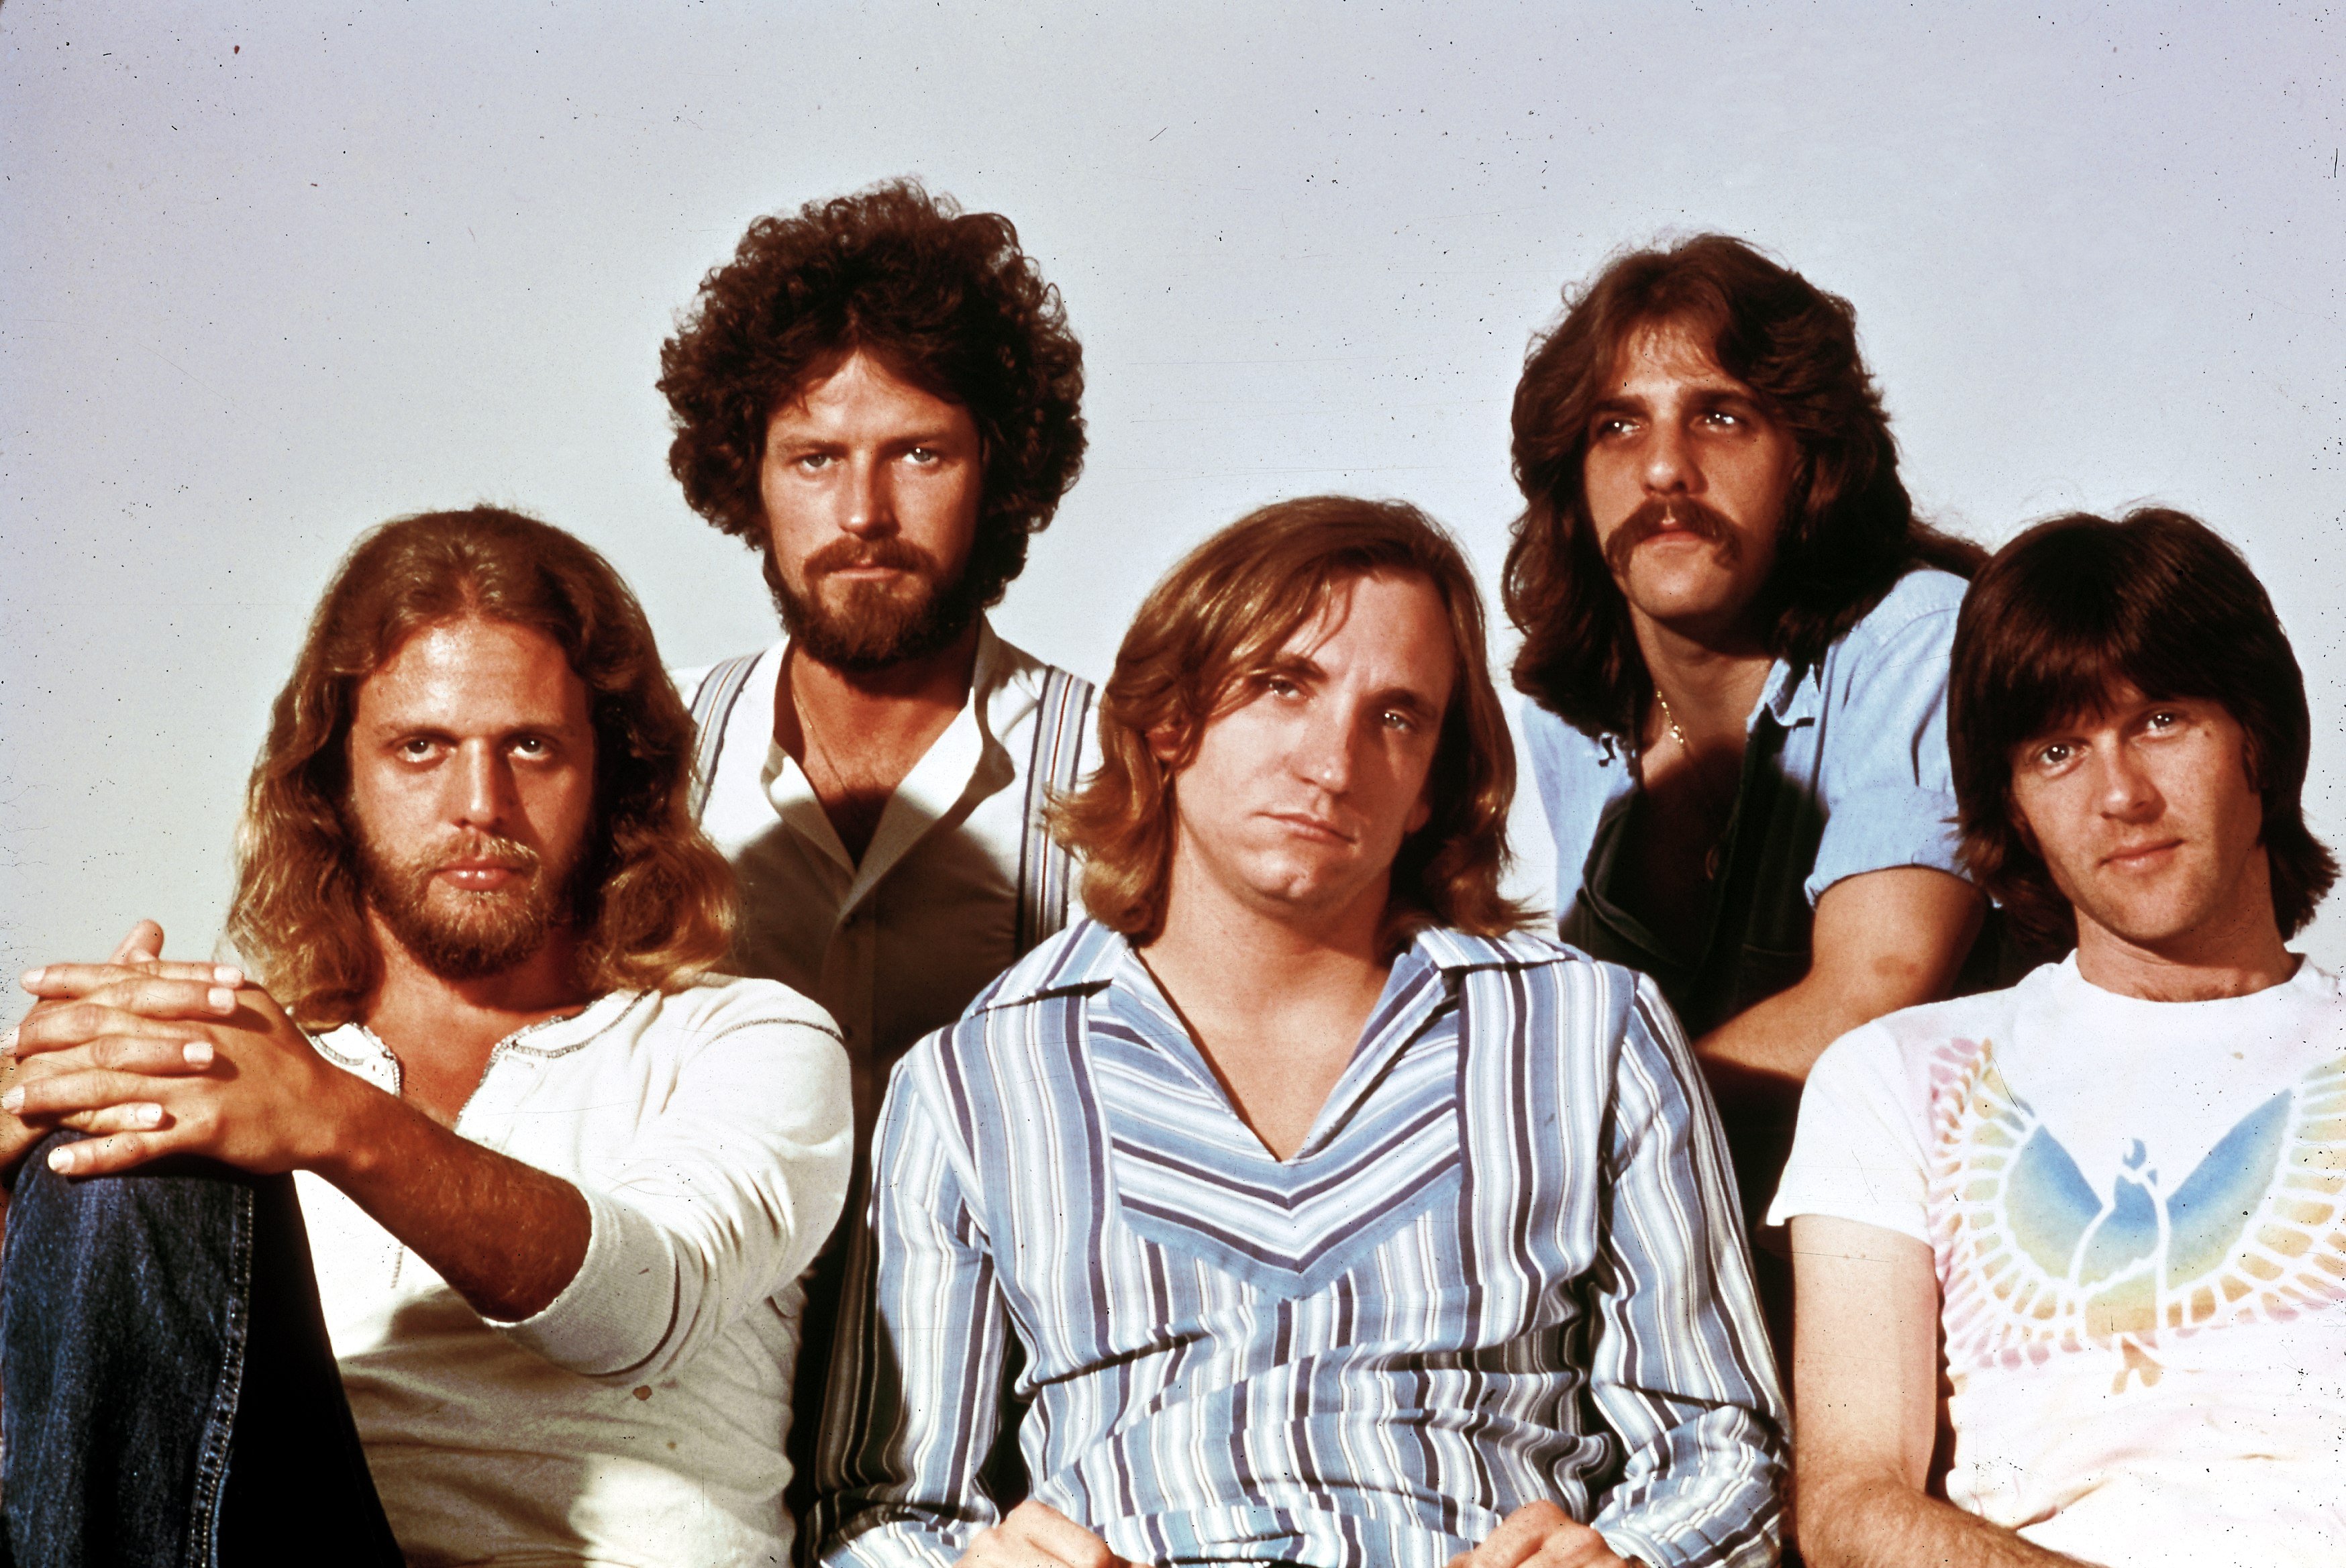 The Eagles sitting during the "Hotel California" era